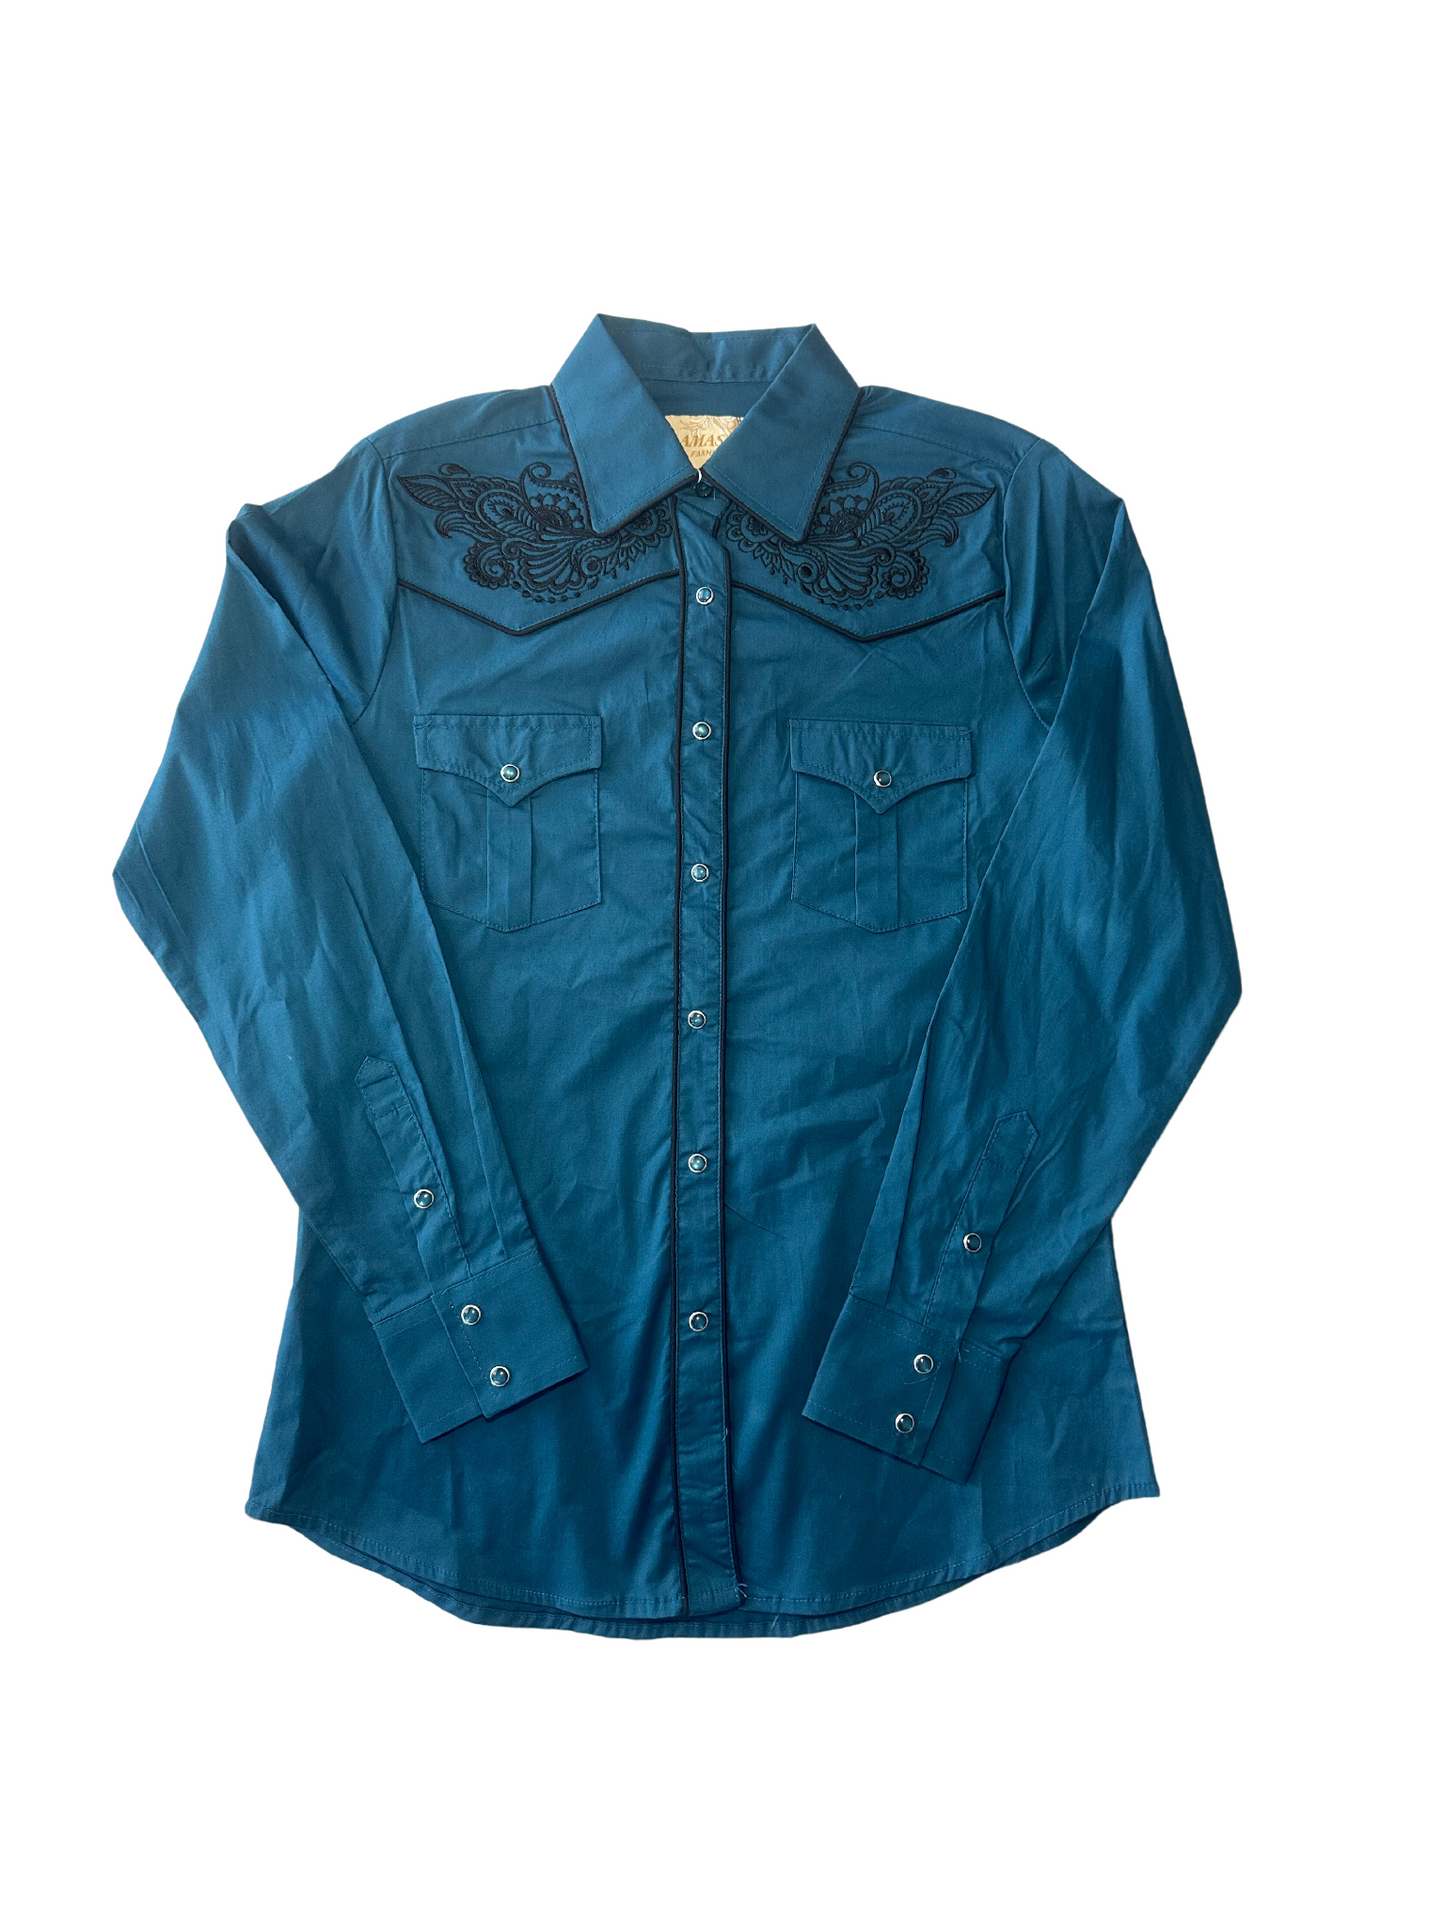 Women's Floral Embroided Button Down Shirt - Teal